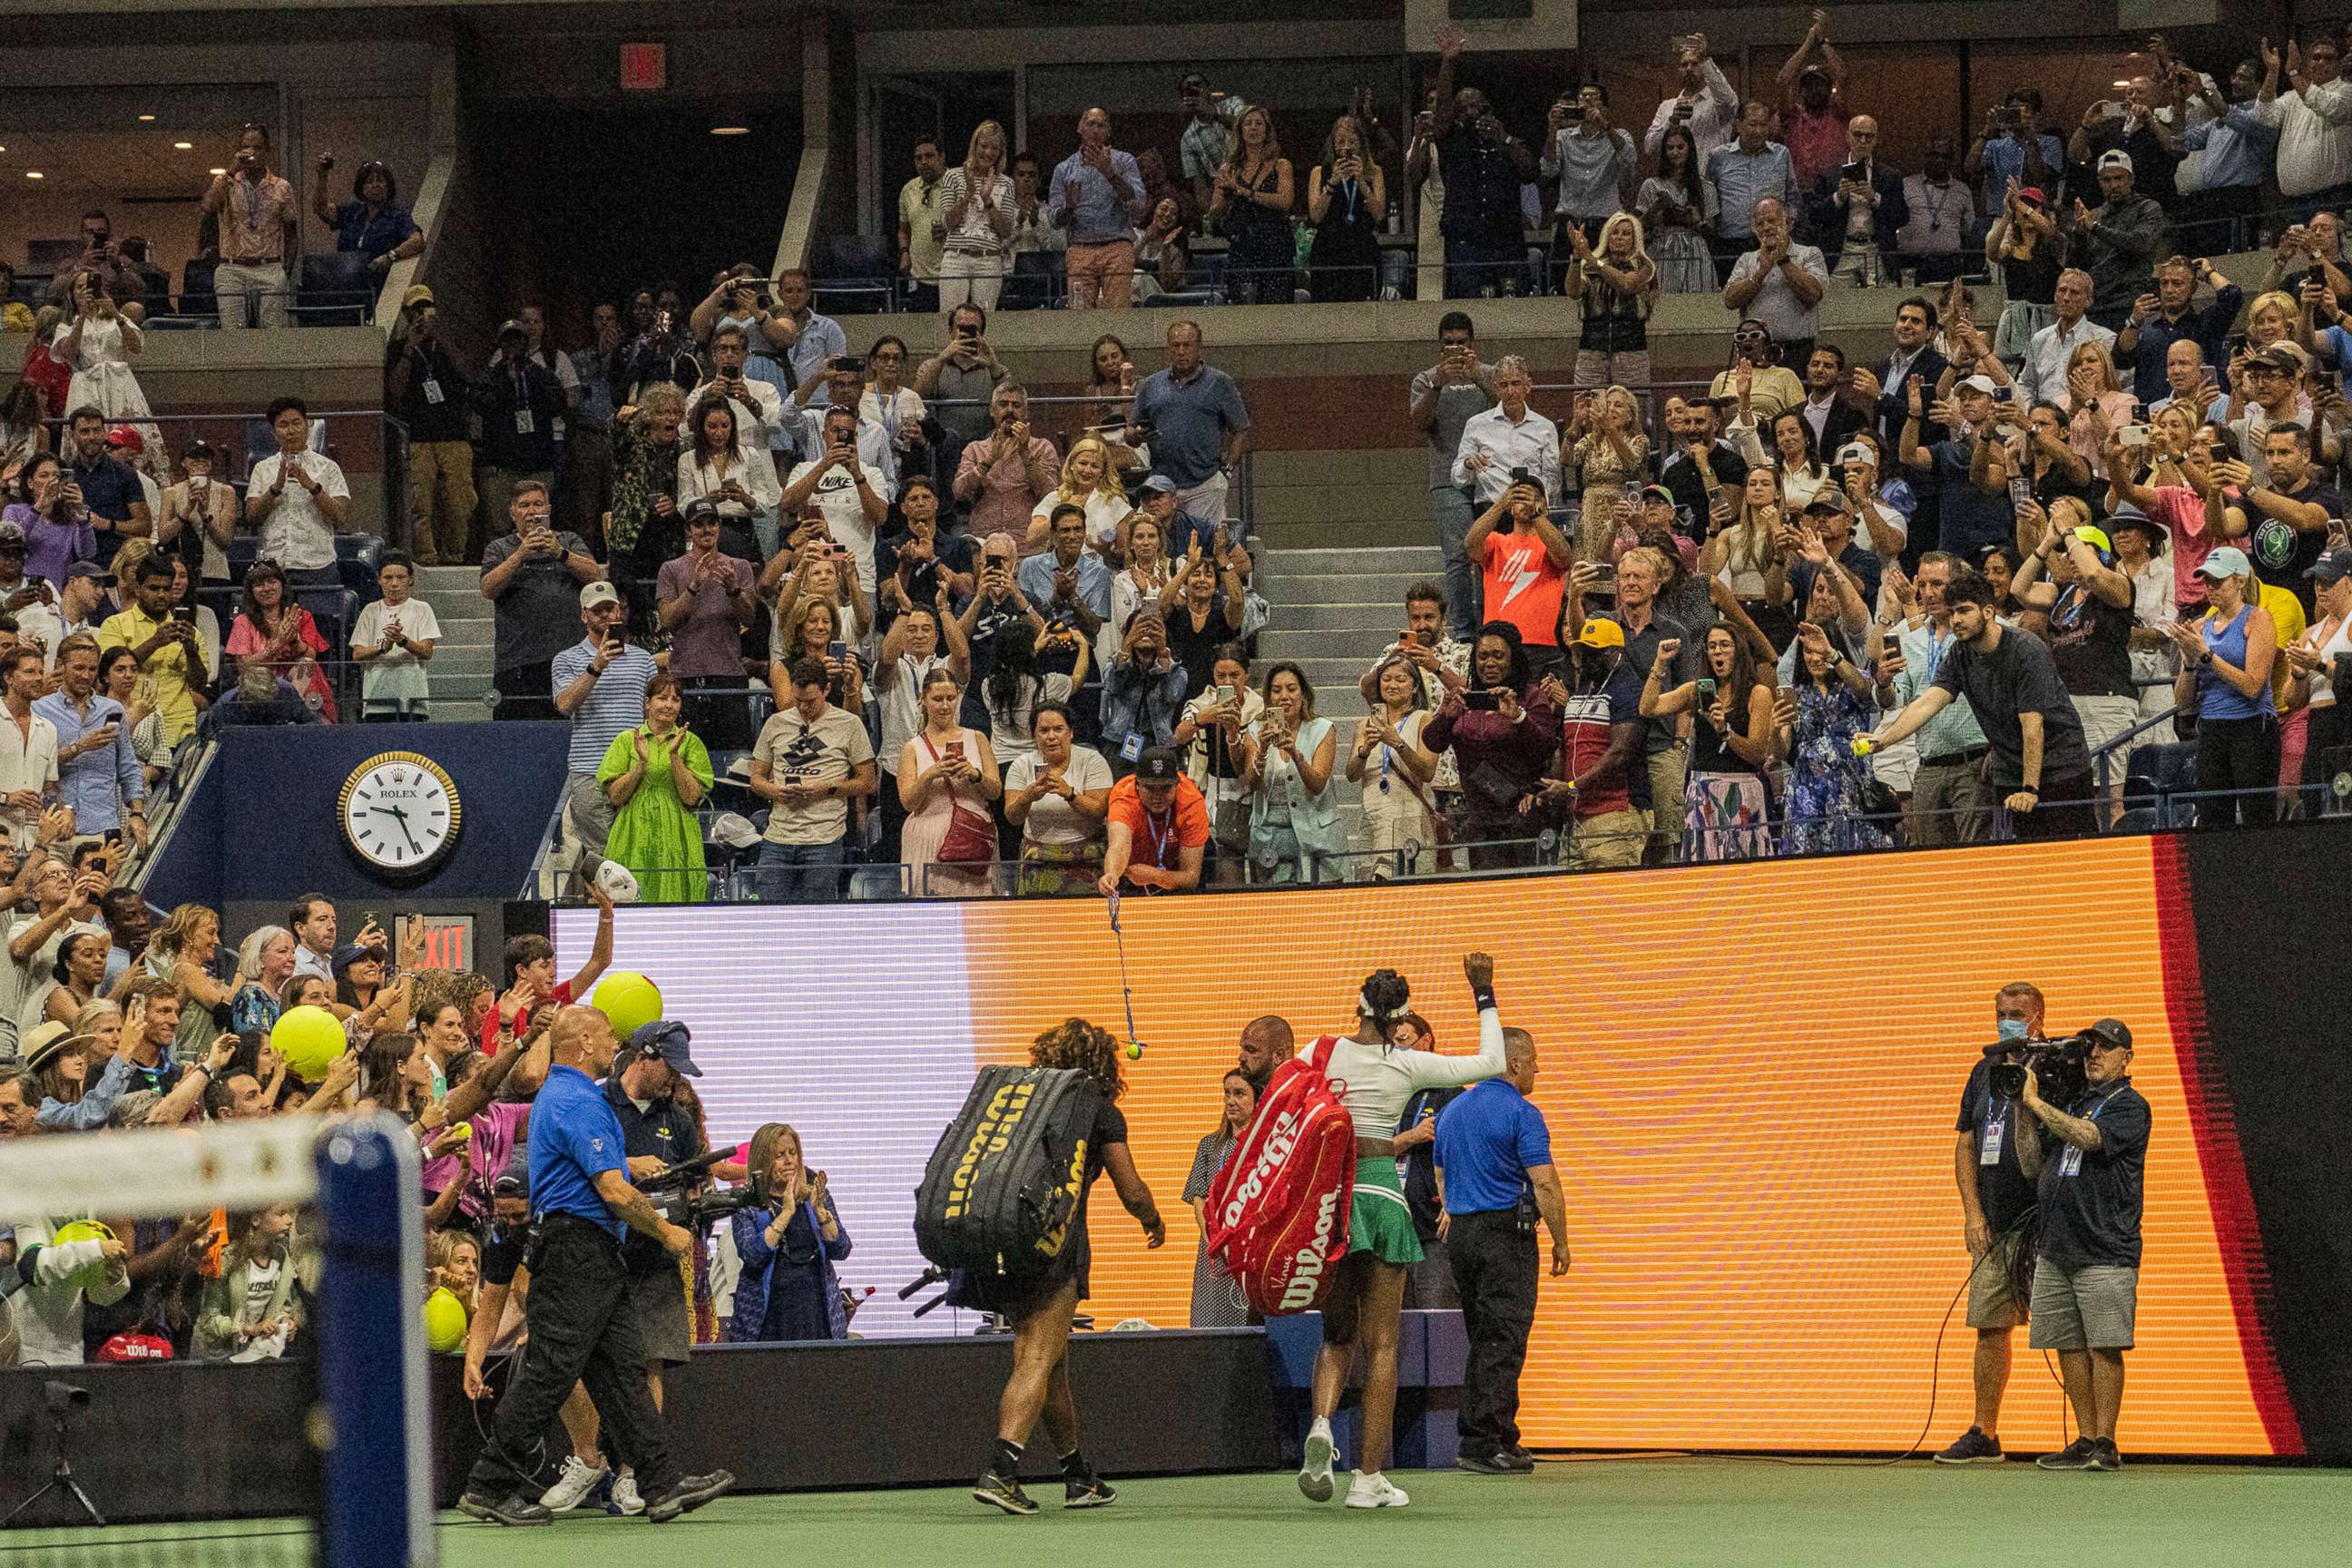 PHOTO: Serena and Venus Williams leave the court after playing in the first round of Women's Doubles on the fourth day of the US Open in Queens, New York. Sept. 1, 2022.